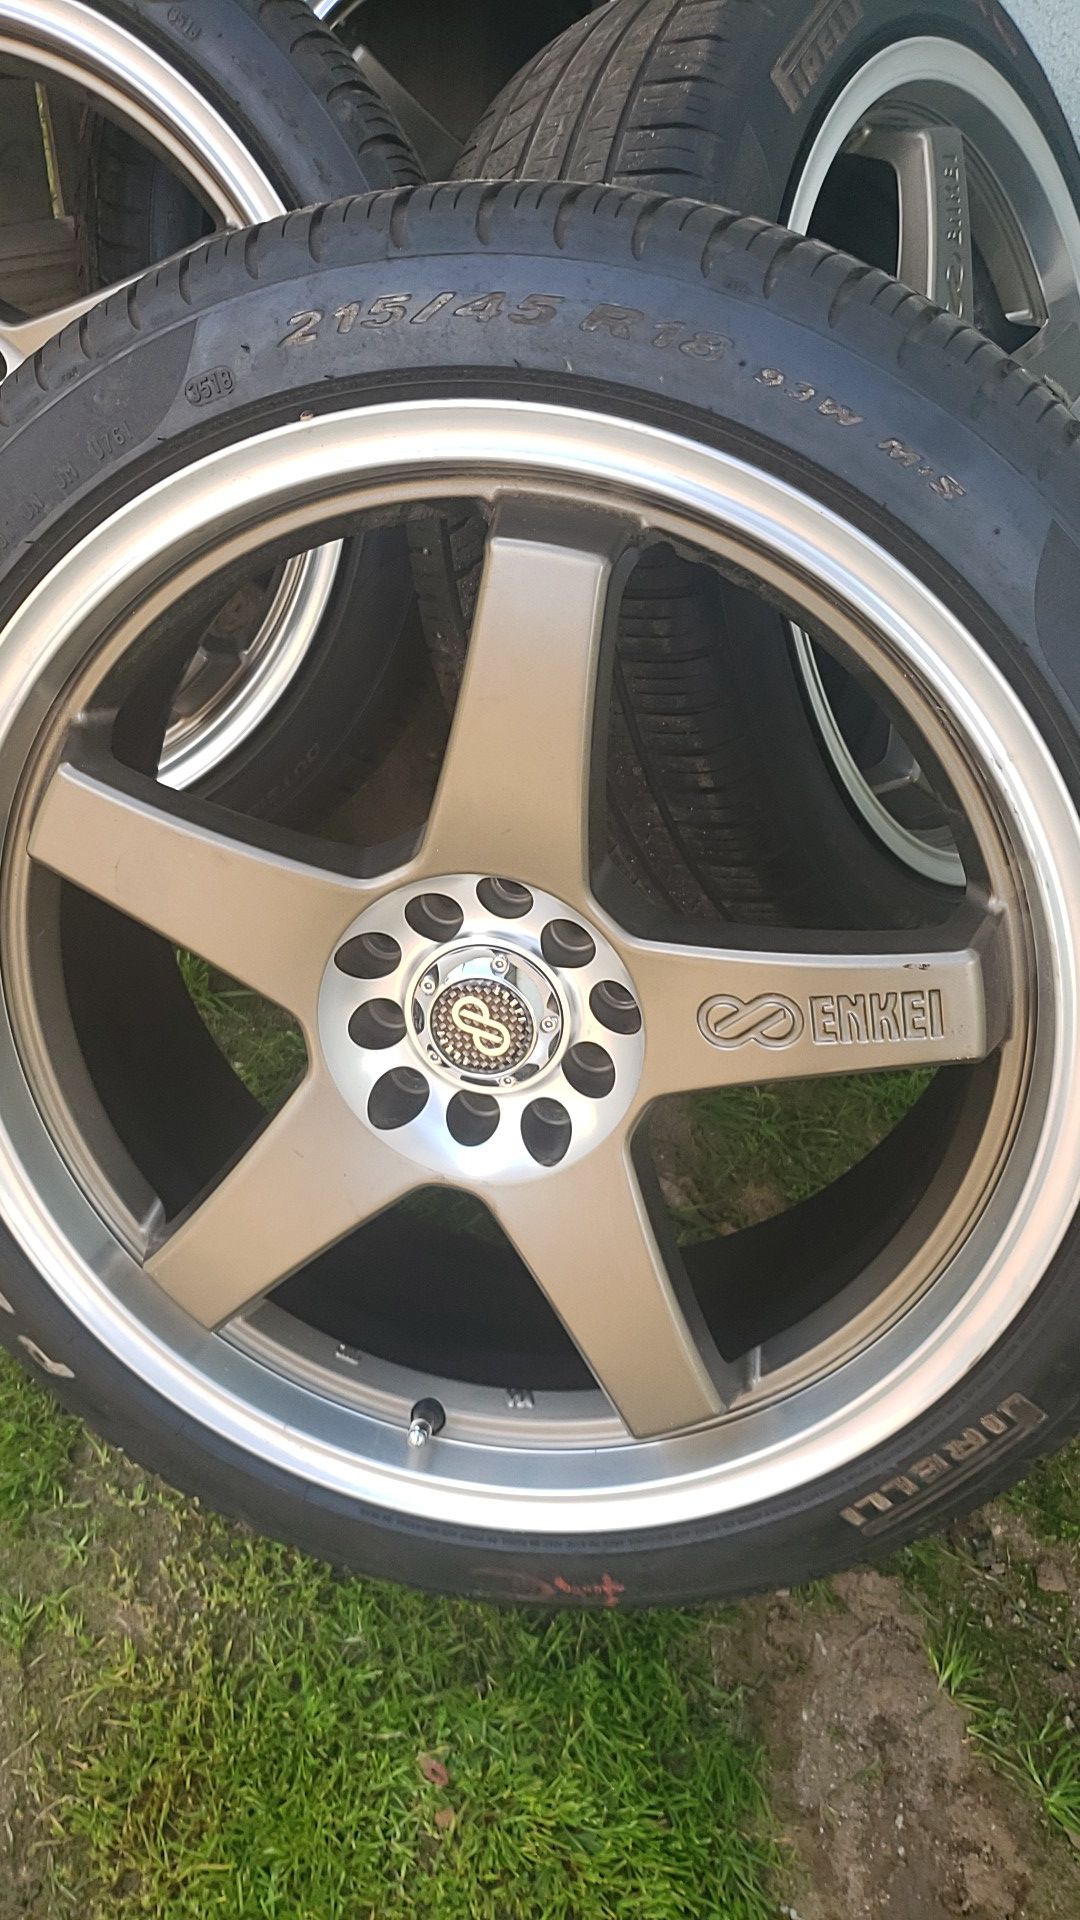 ENKEI 18 inch rims with tires.